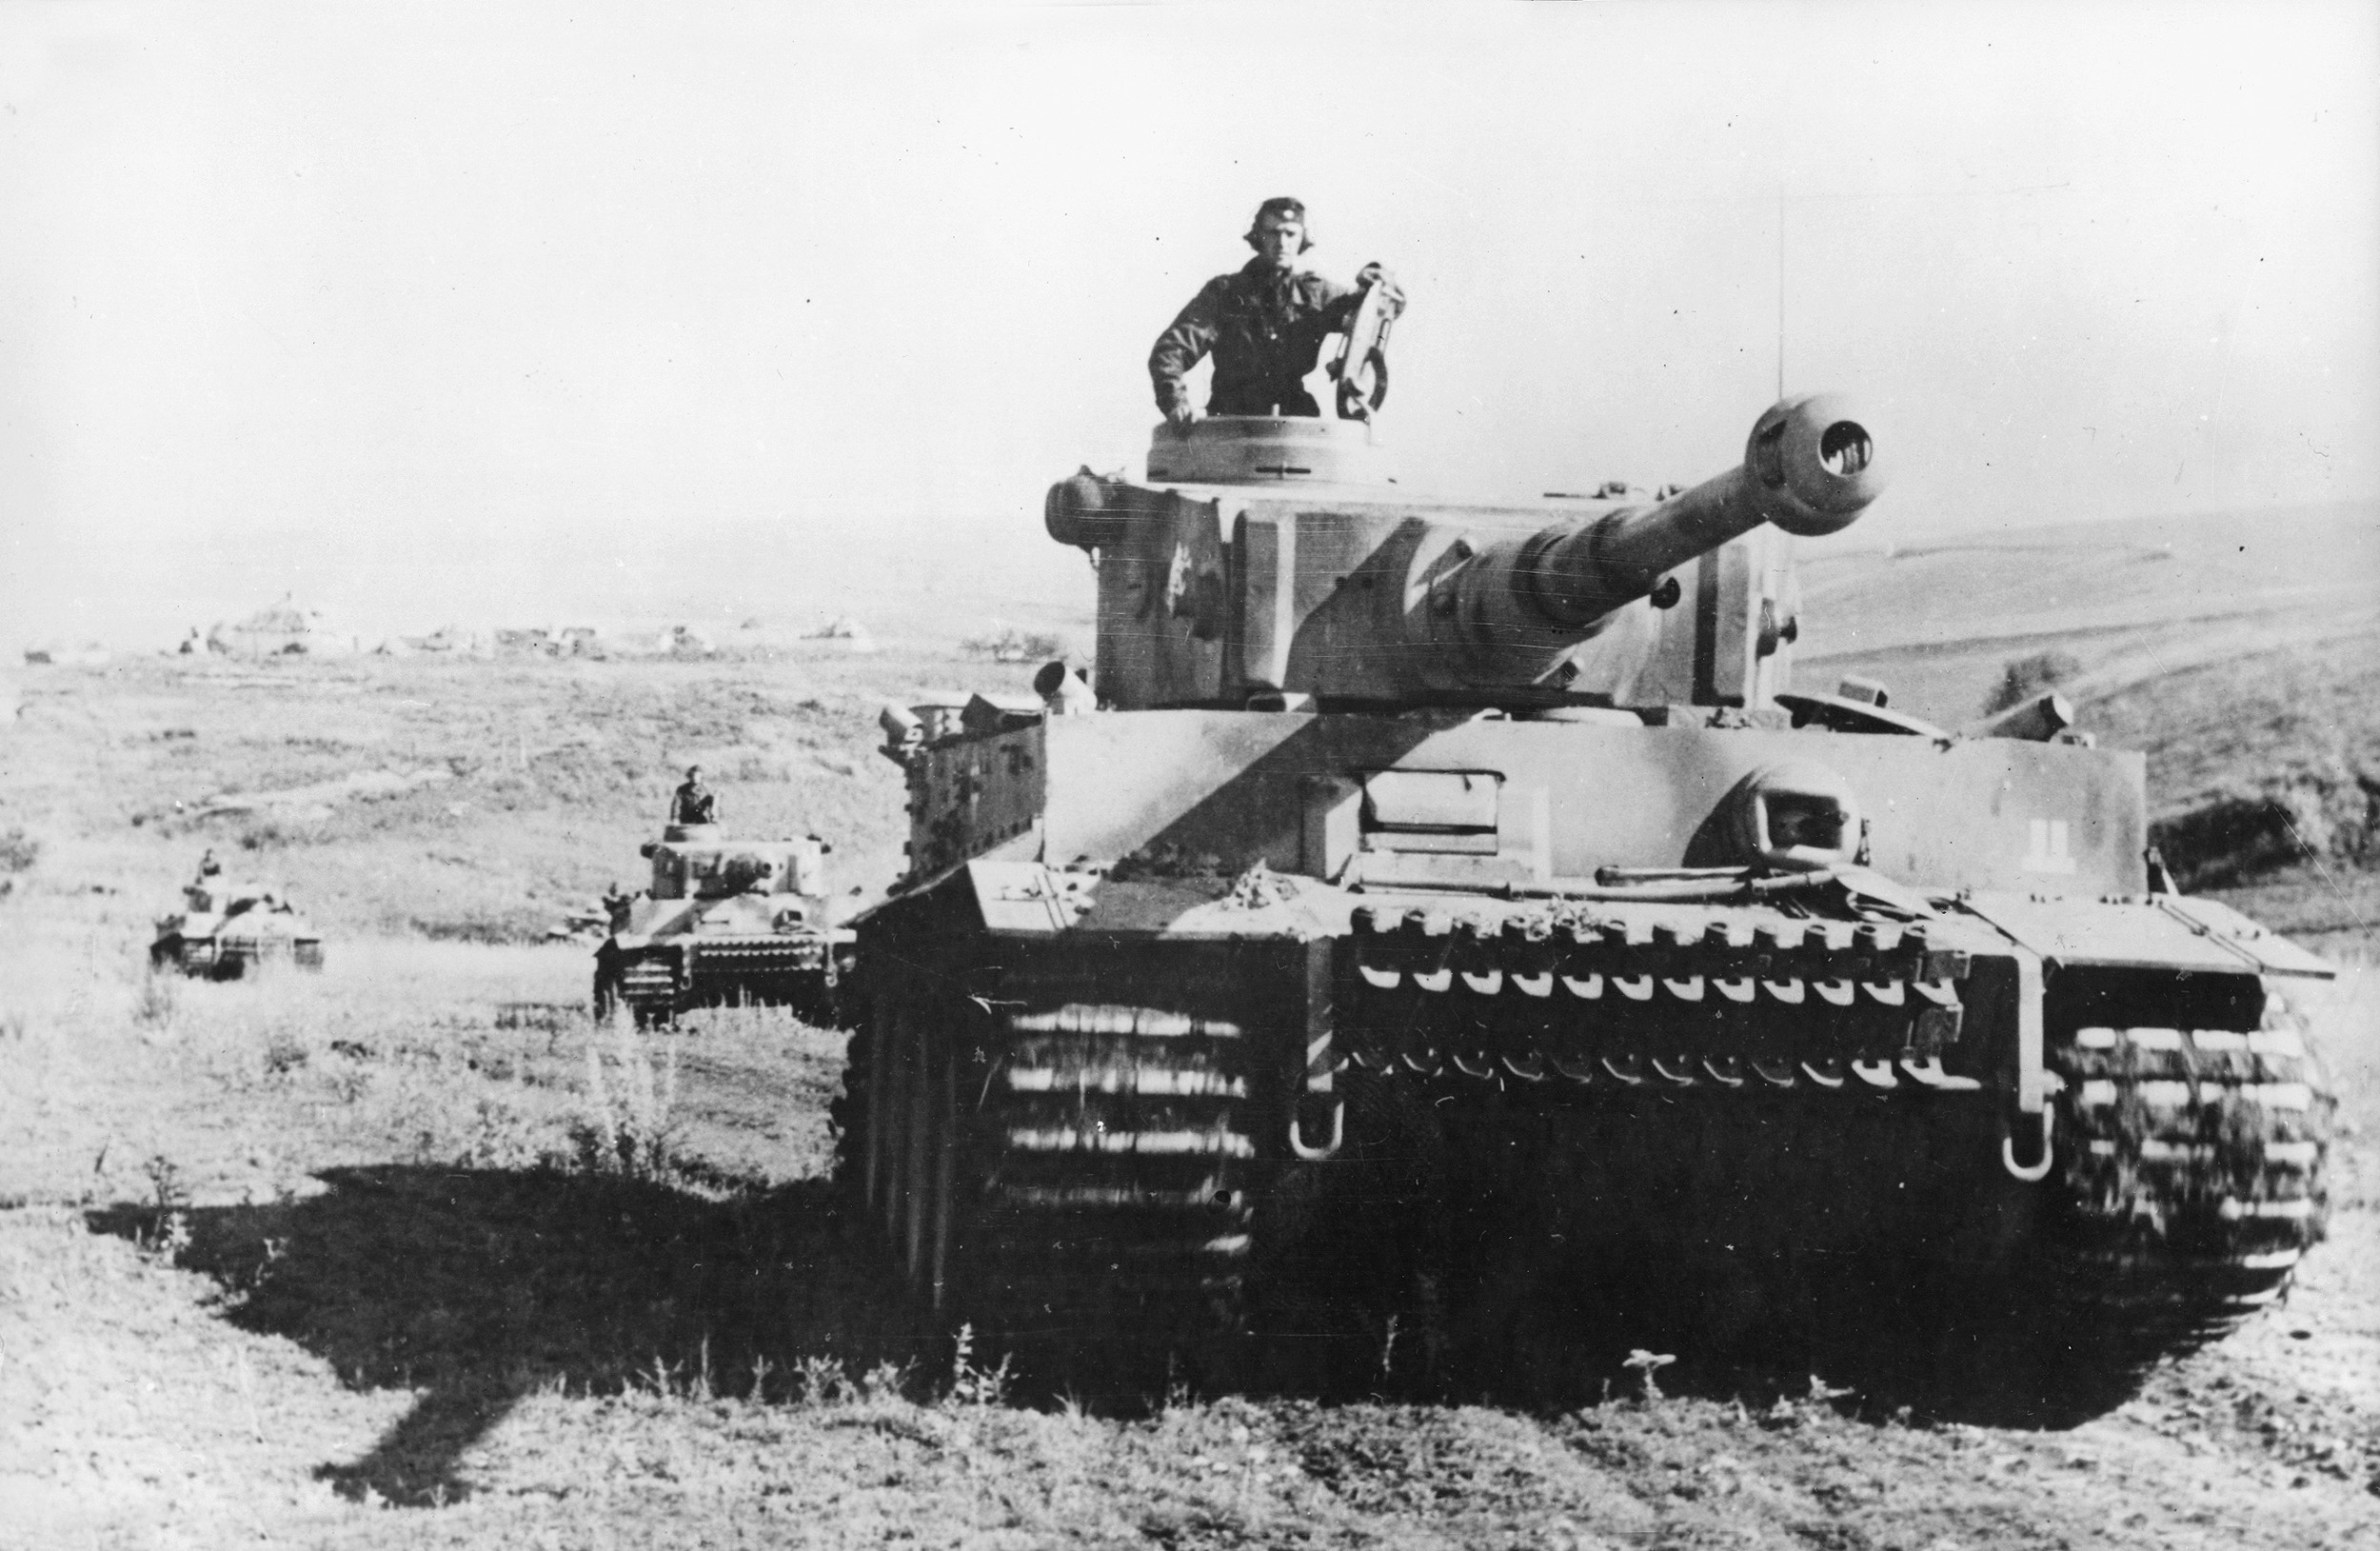 A Tiger VI leads others of its kind toward Belgorod.